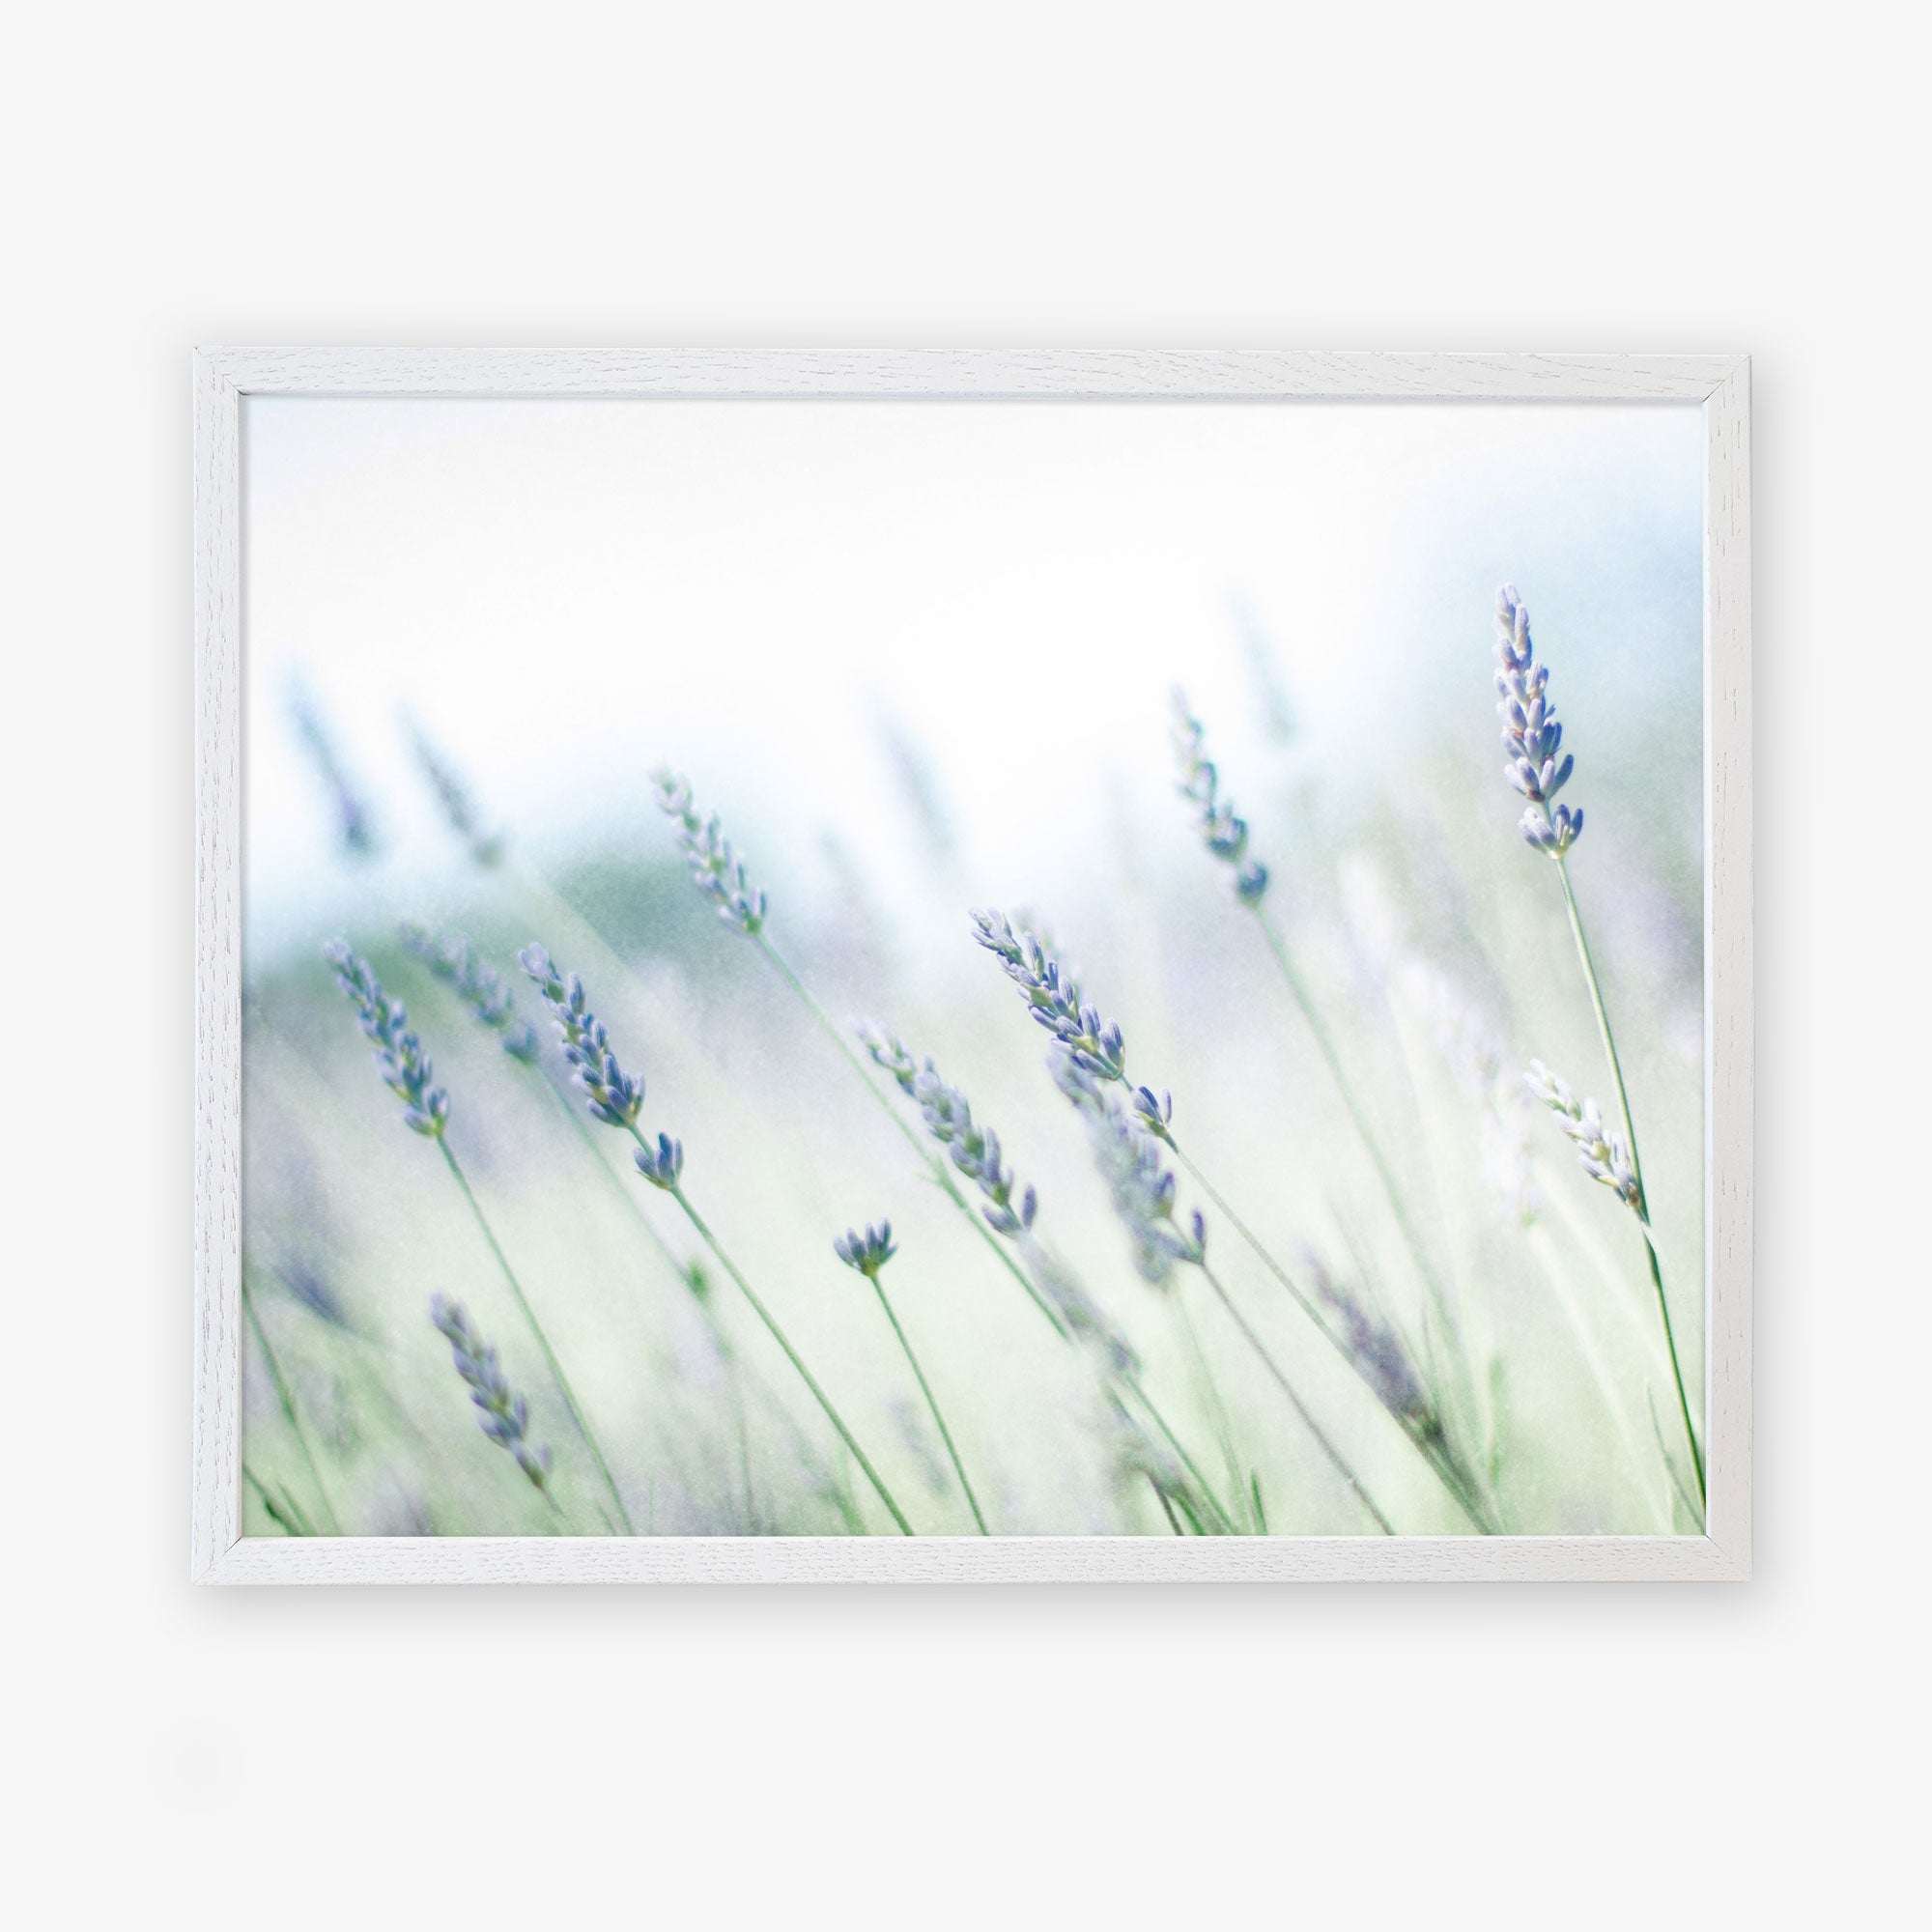 A framed photograph of Offley Green&#39;s Rustic Farmhouse Floral Wall Art, &#39;Buds of Lavender&#39;, featuring a soft-focus, dreamy image of lavender flowers in the Santa Ynez Valley, emphasizing their delicate purple hues against a blurred green and white background.